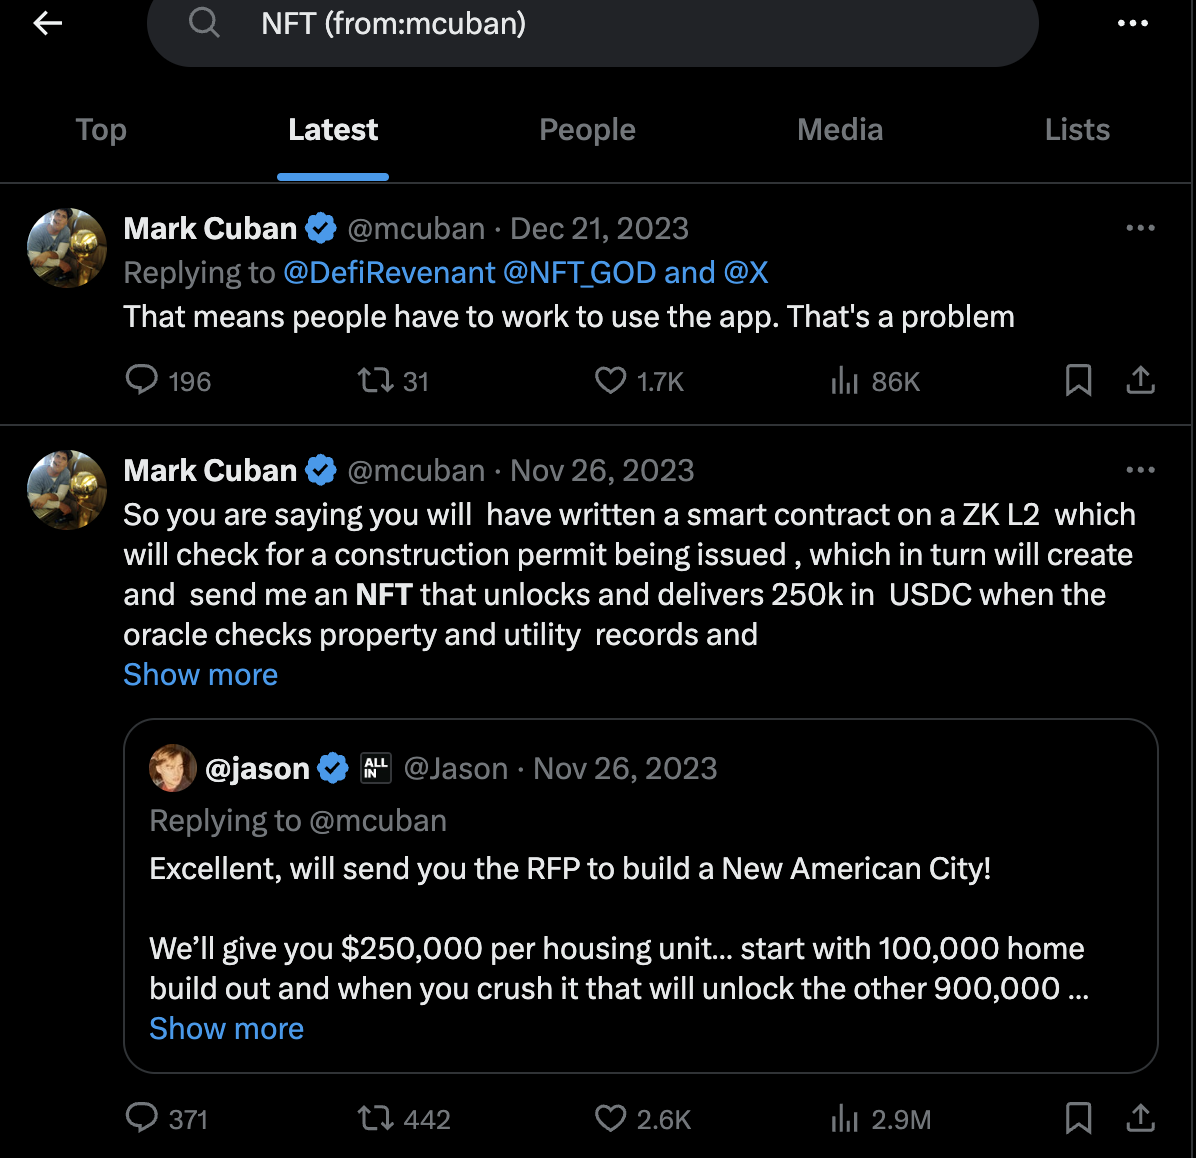 Mark Cuban's tweets including the word "NFT"